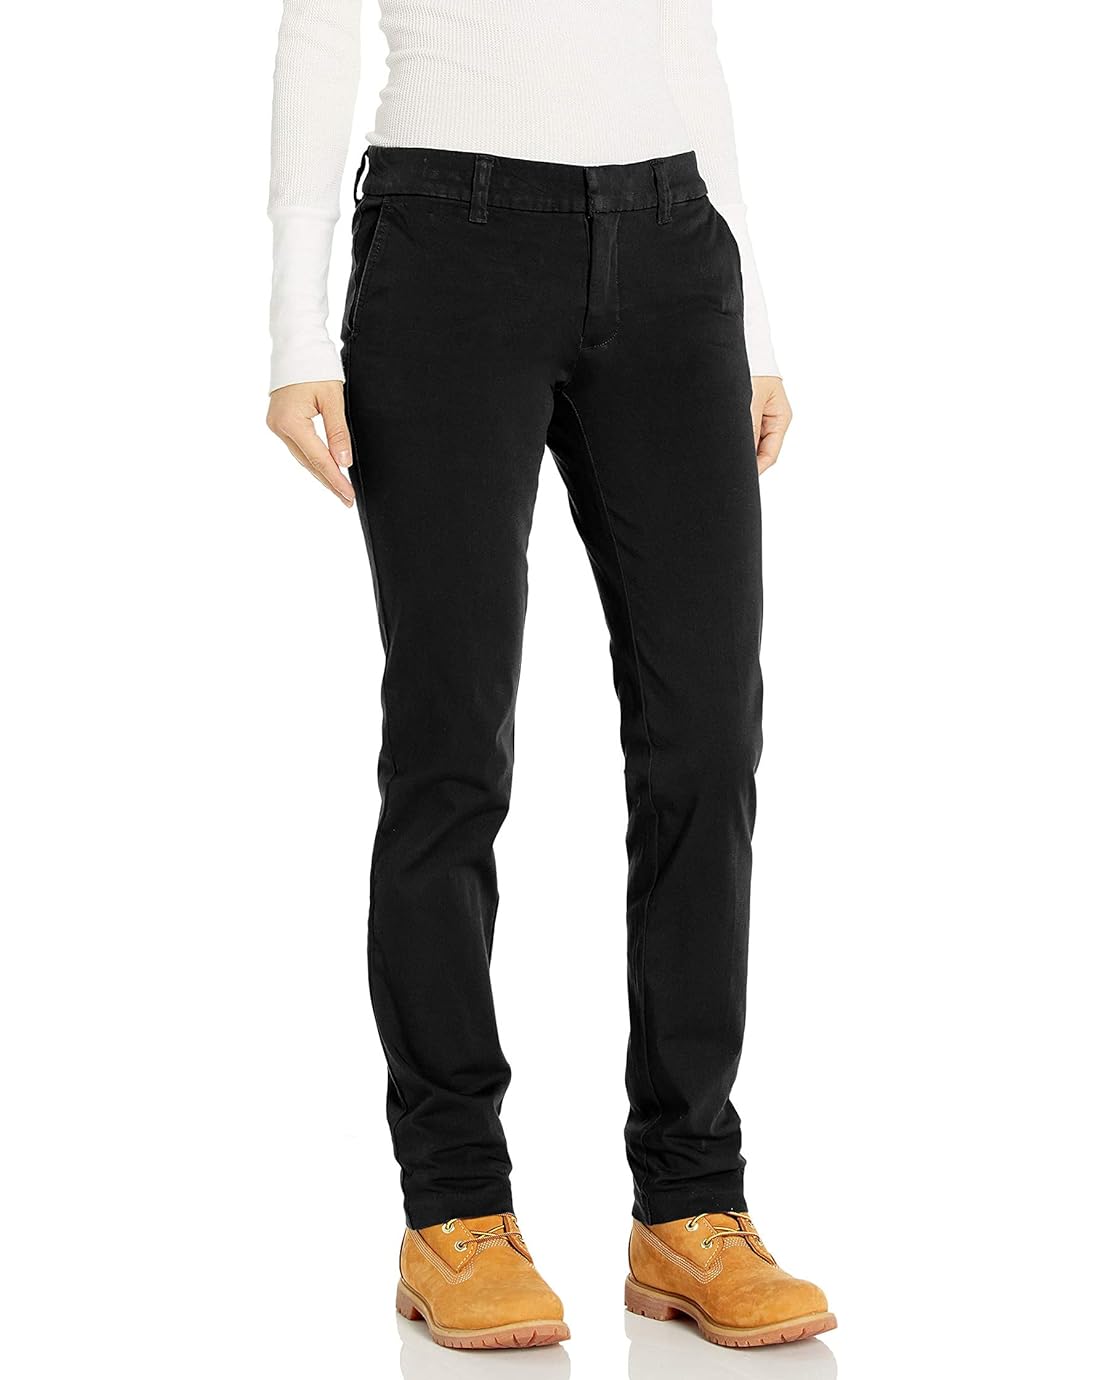 Dickies Womens Perfect Shape Straight Twill Pant